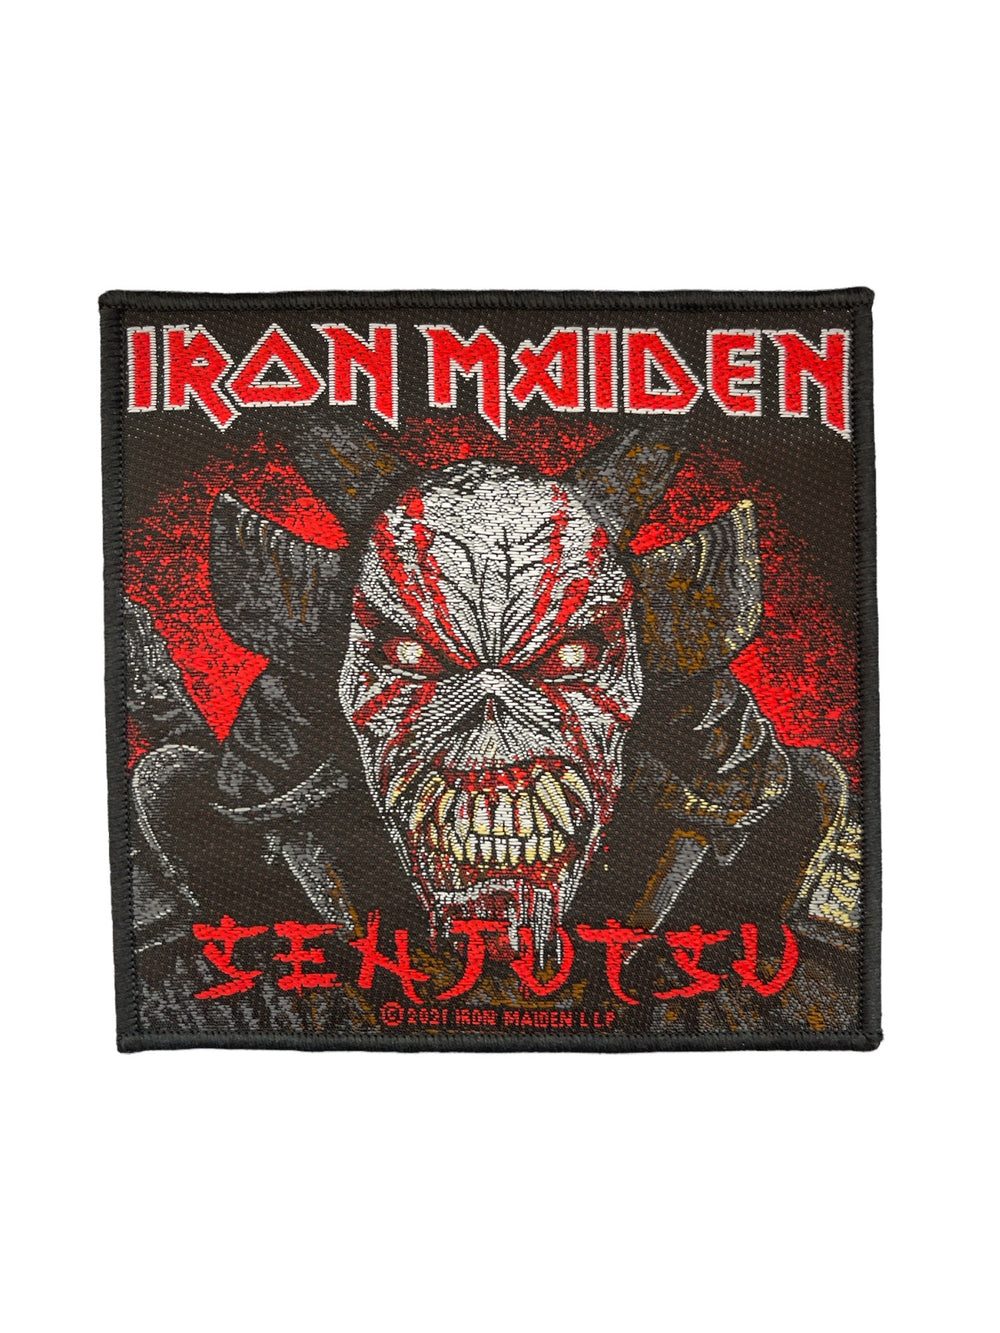 Iron Maiden Senjutsu Back Cover Official Woven Patch Brand New